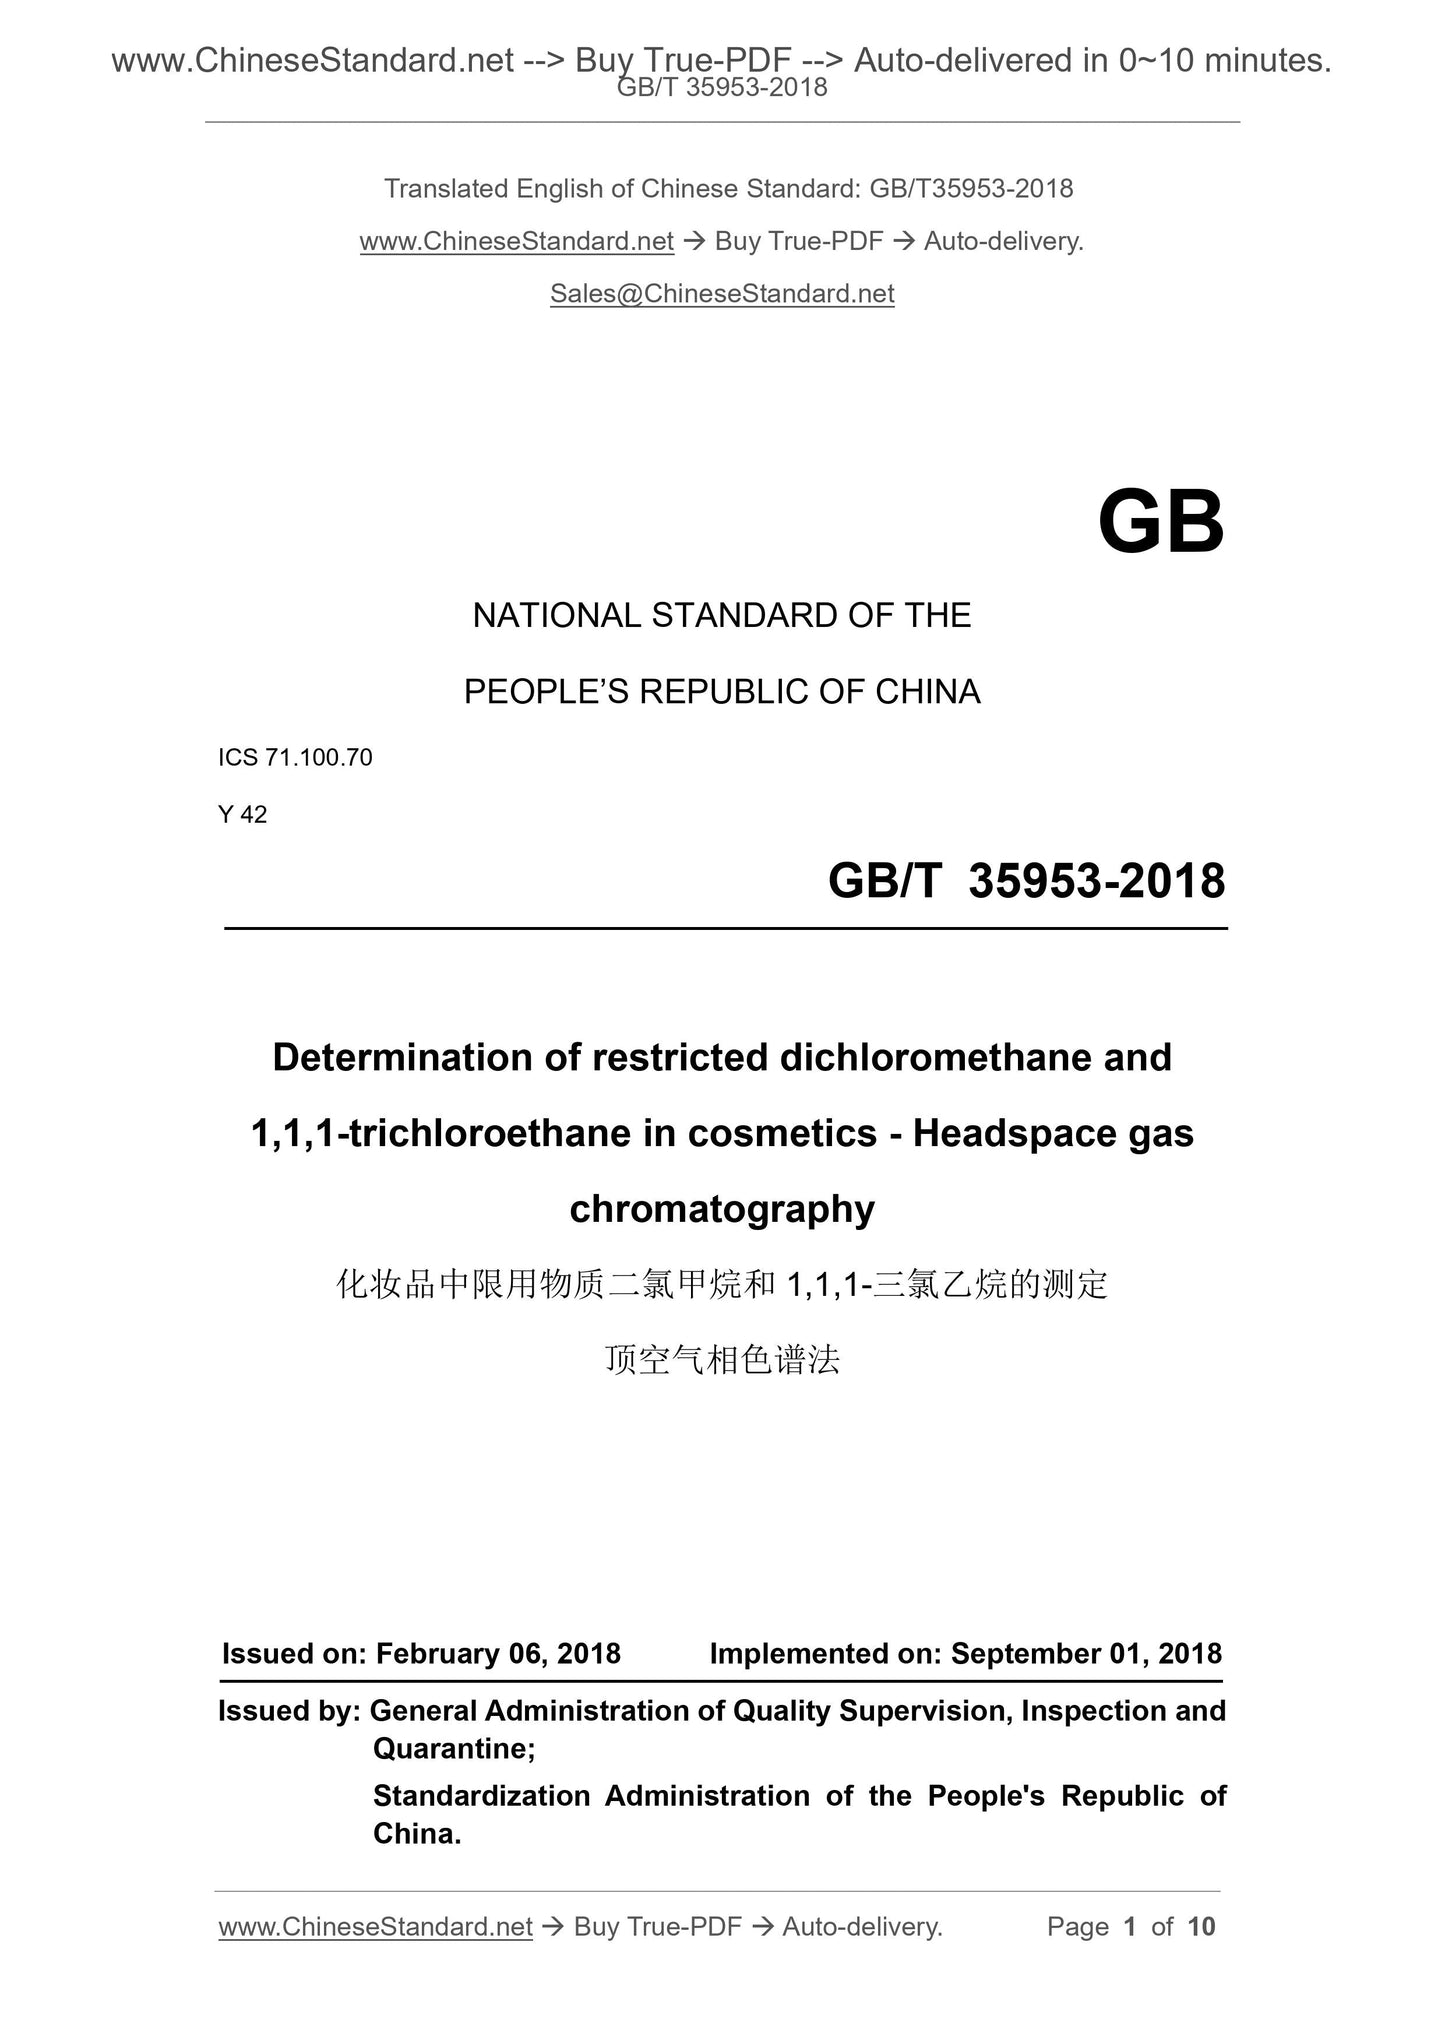 GB/T 35953-2018 Page 1